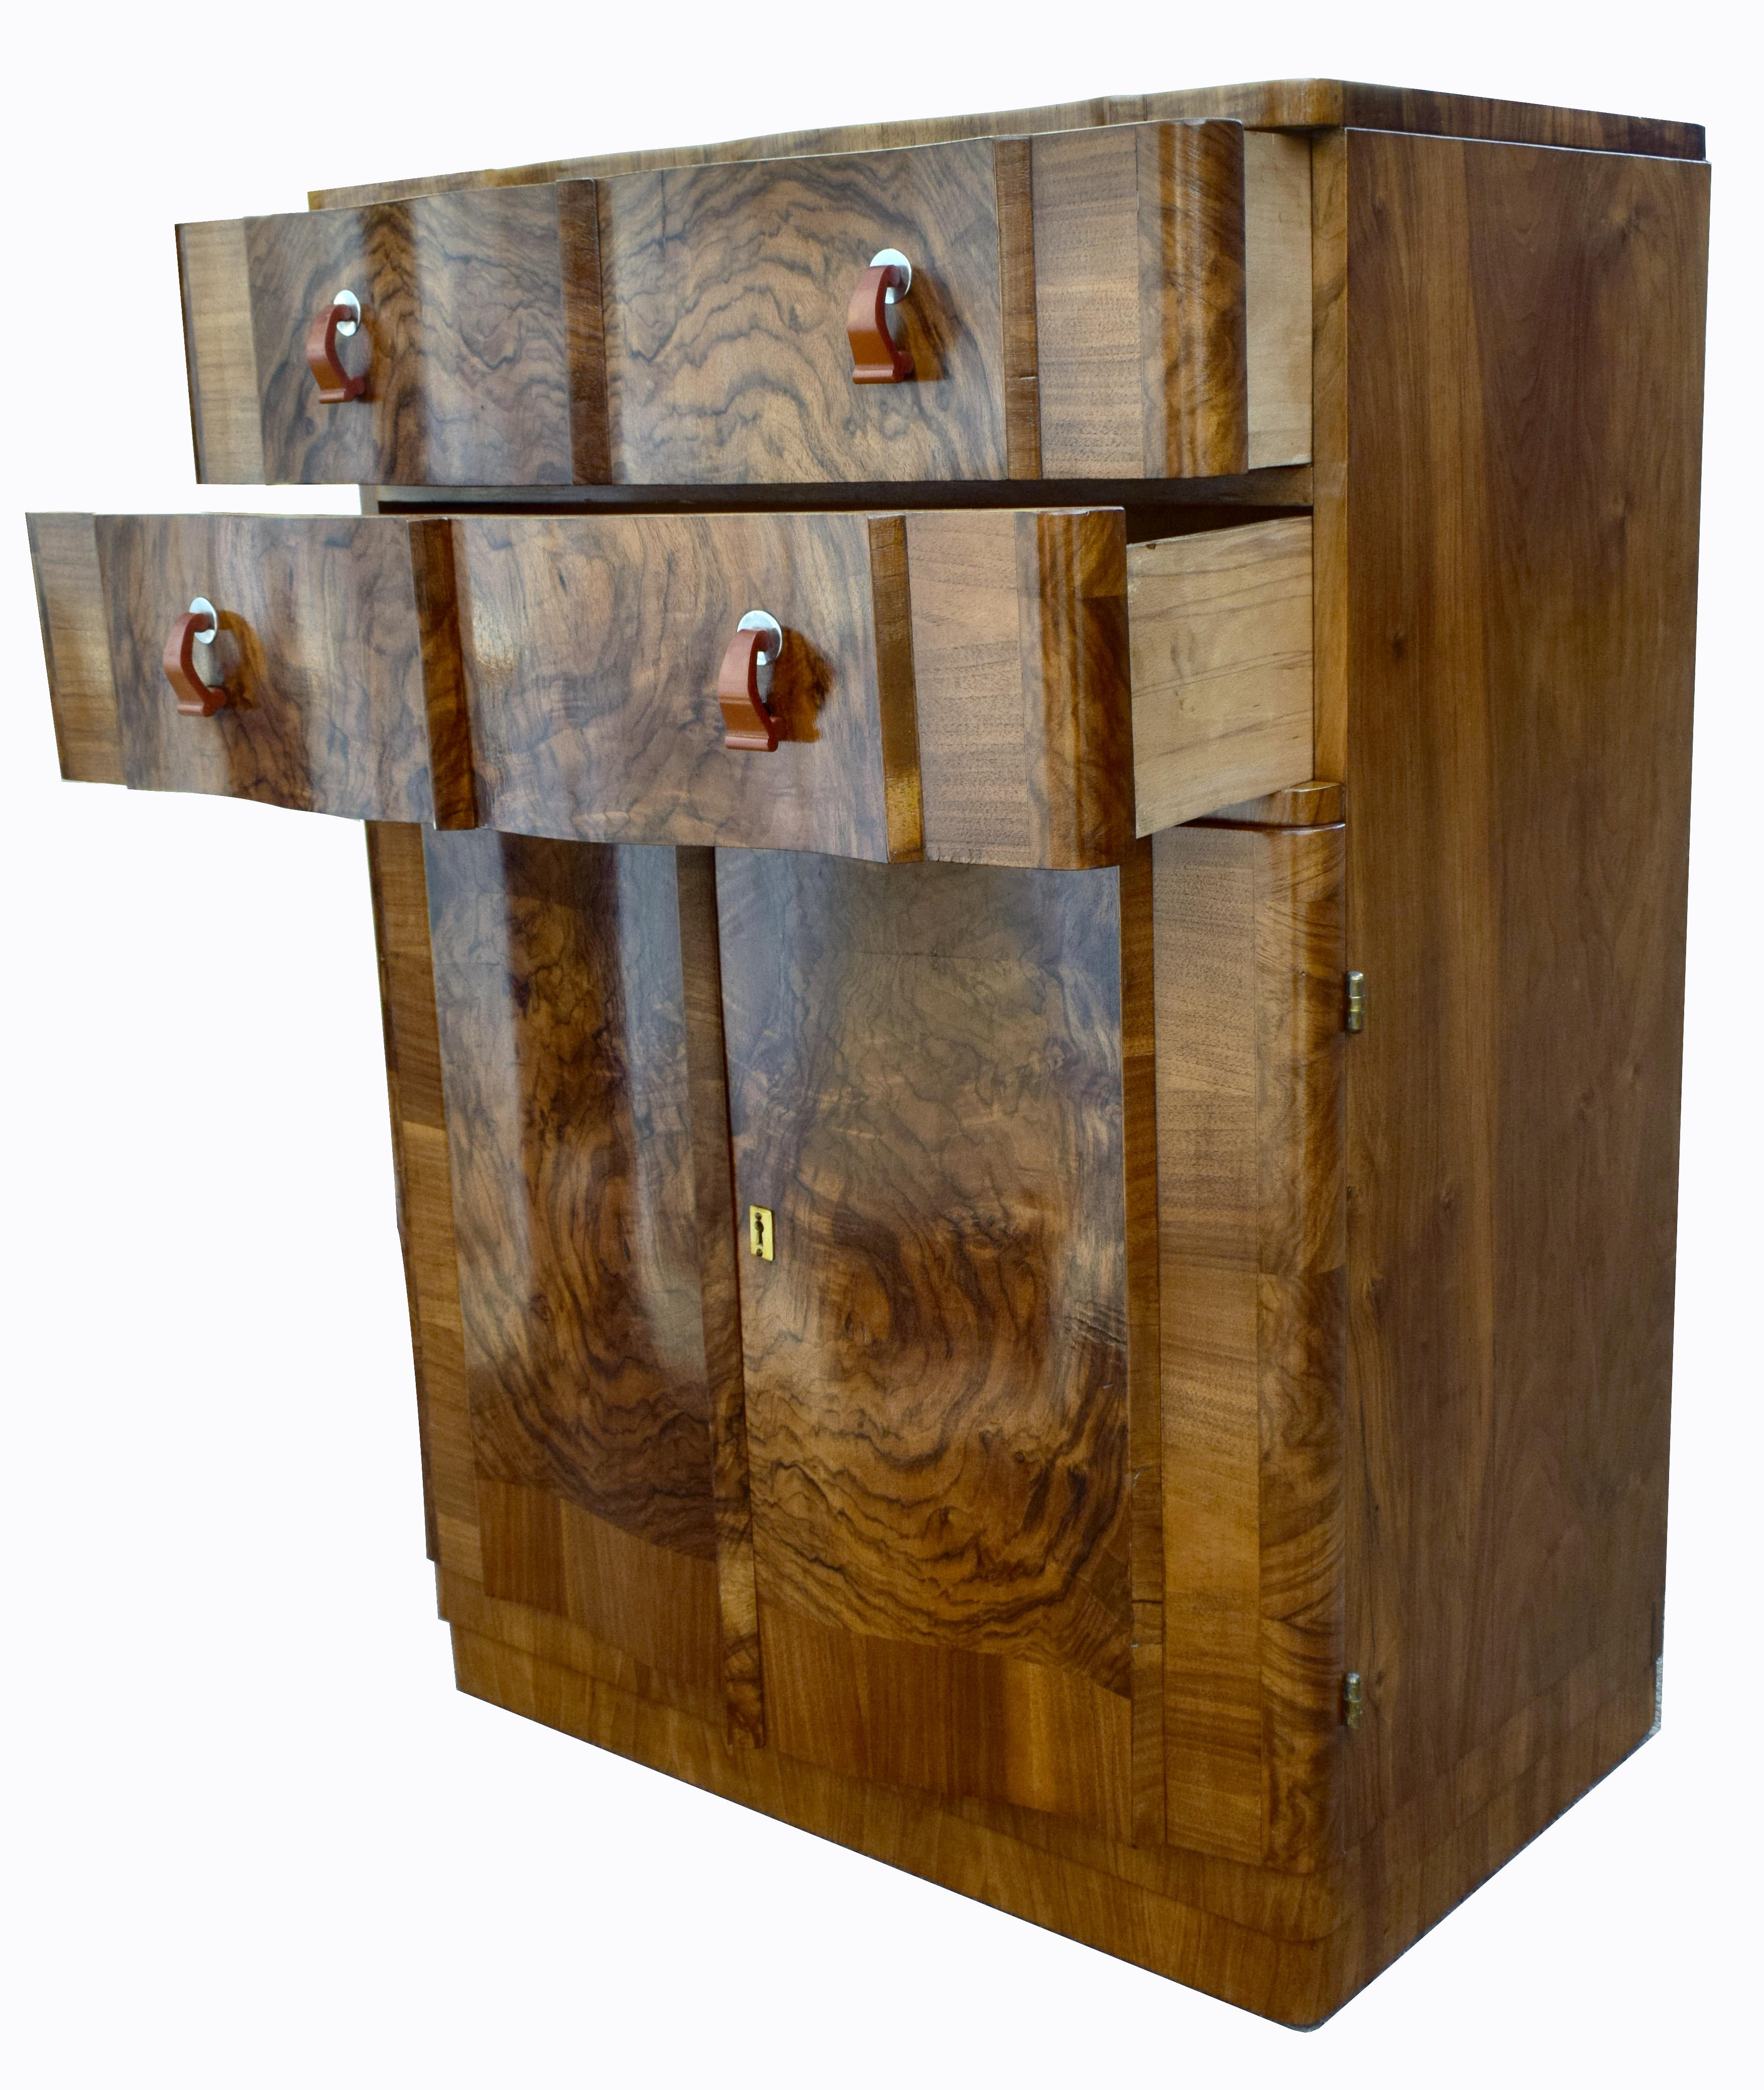 For your consideration is this English Art Deco burr walnut two-door, two drawer single-piece tallboy, circa 1930, boasting stunning mirror matched veneers and in excellent original condition. Comprising of an elegant Art Deco serpentine design with